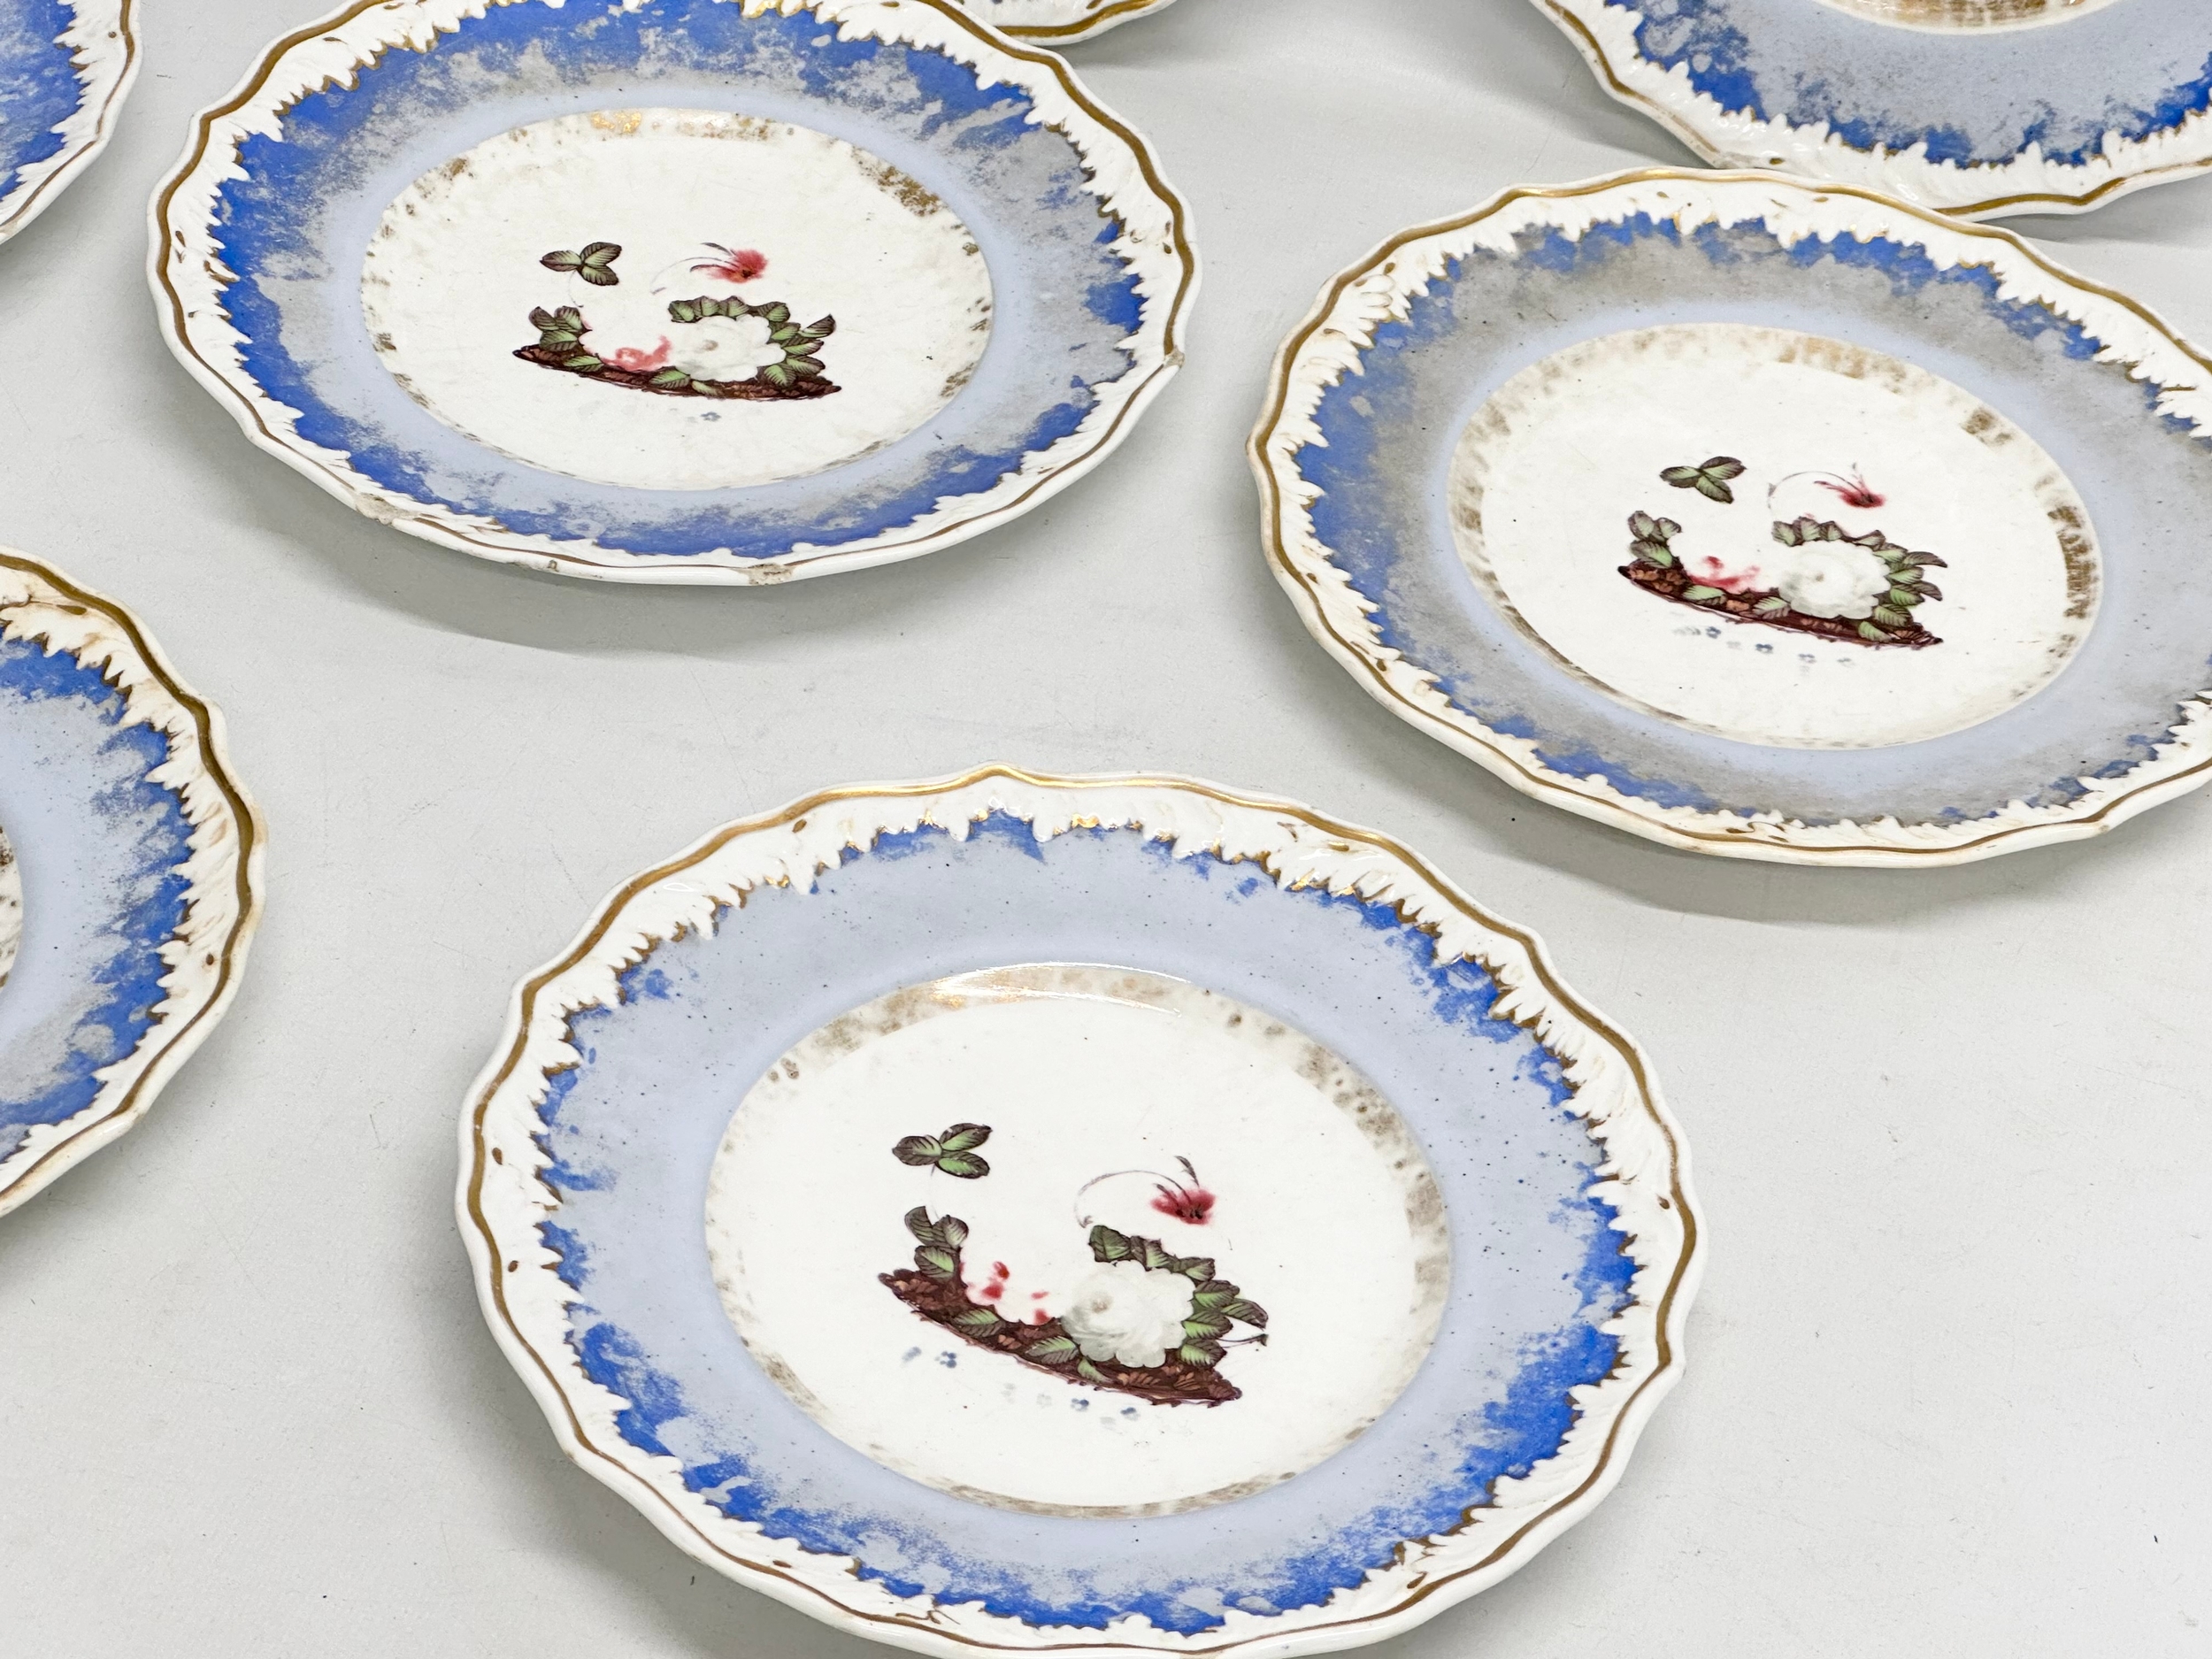 An early 19th century Samuel Alcock ‘Periwinkle’ part dinner service. Circa 1822-1830. - Image 12 of 15